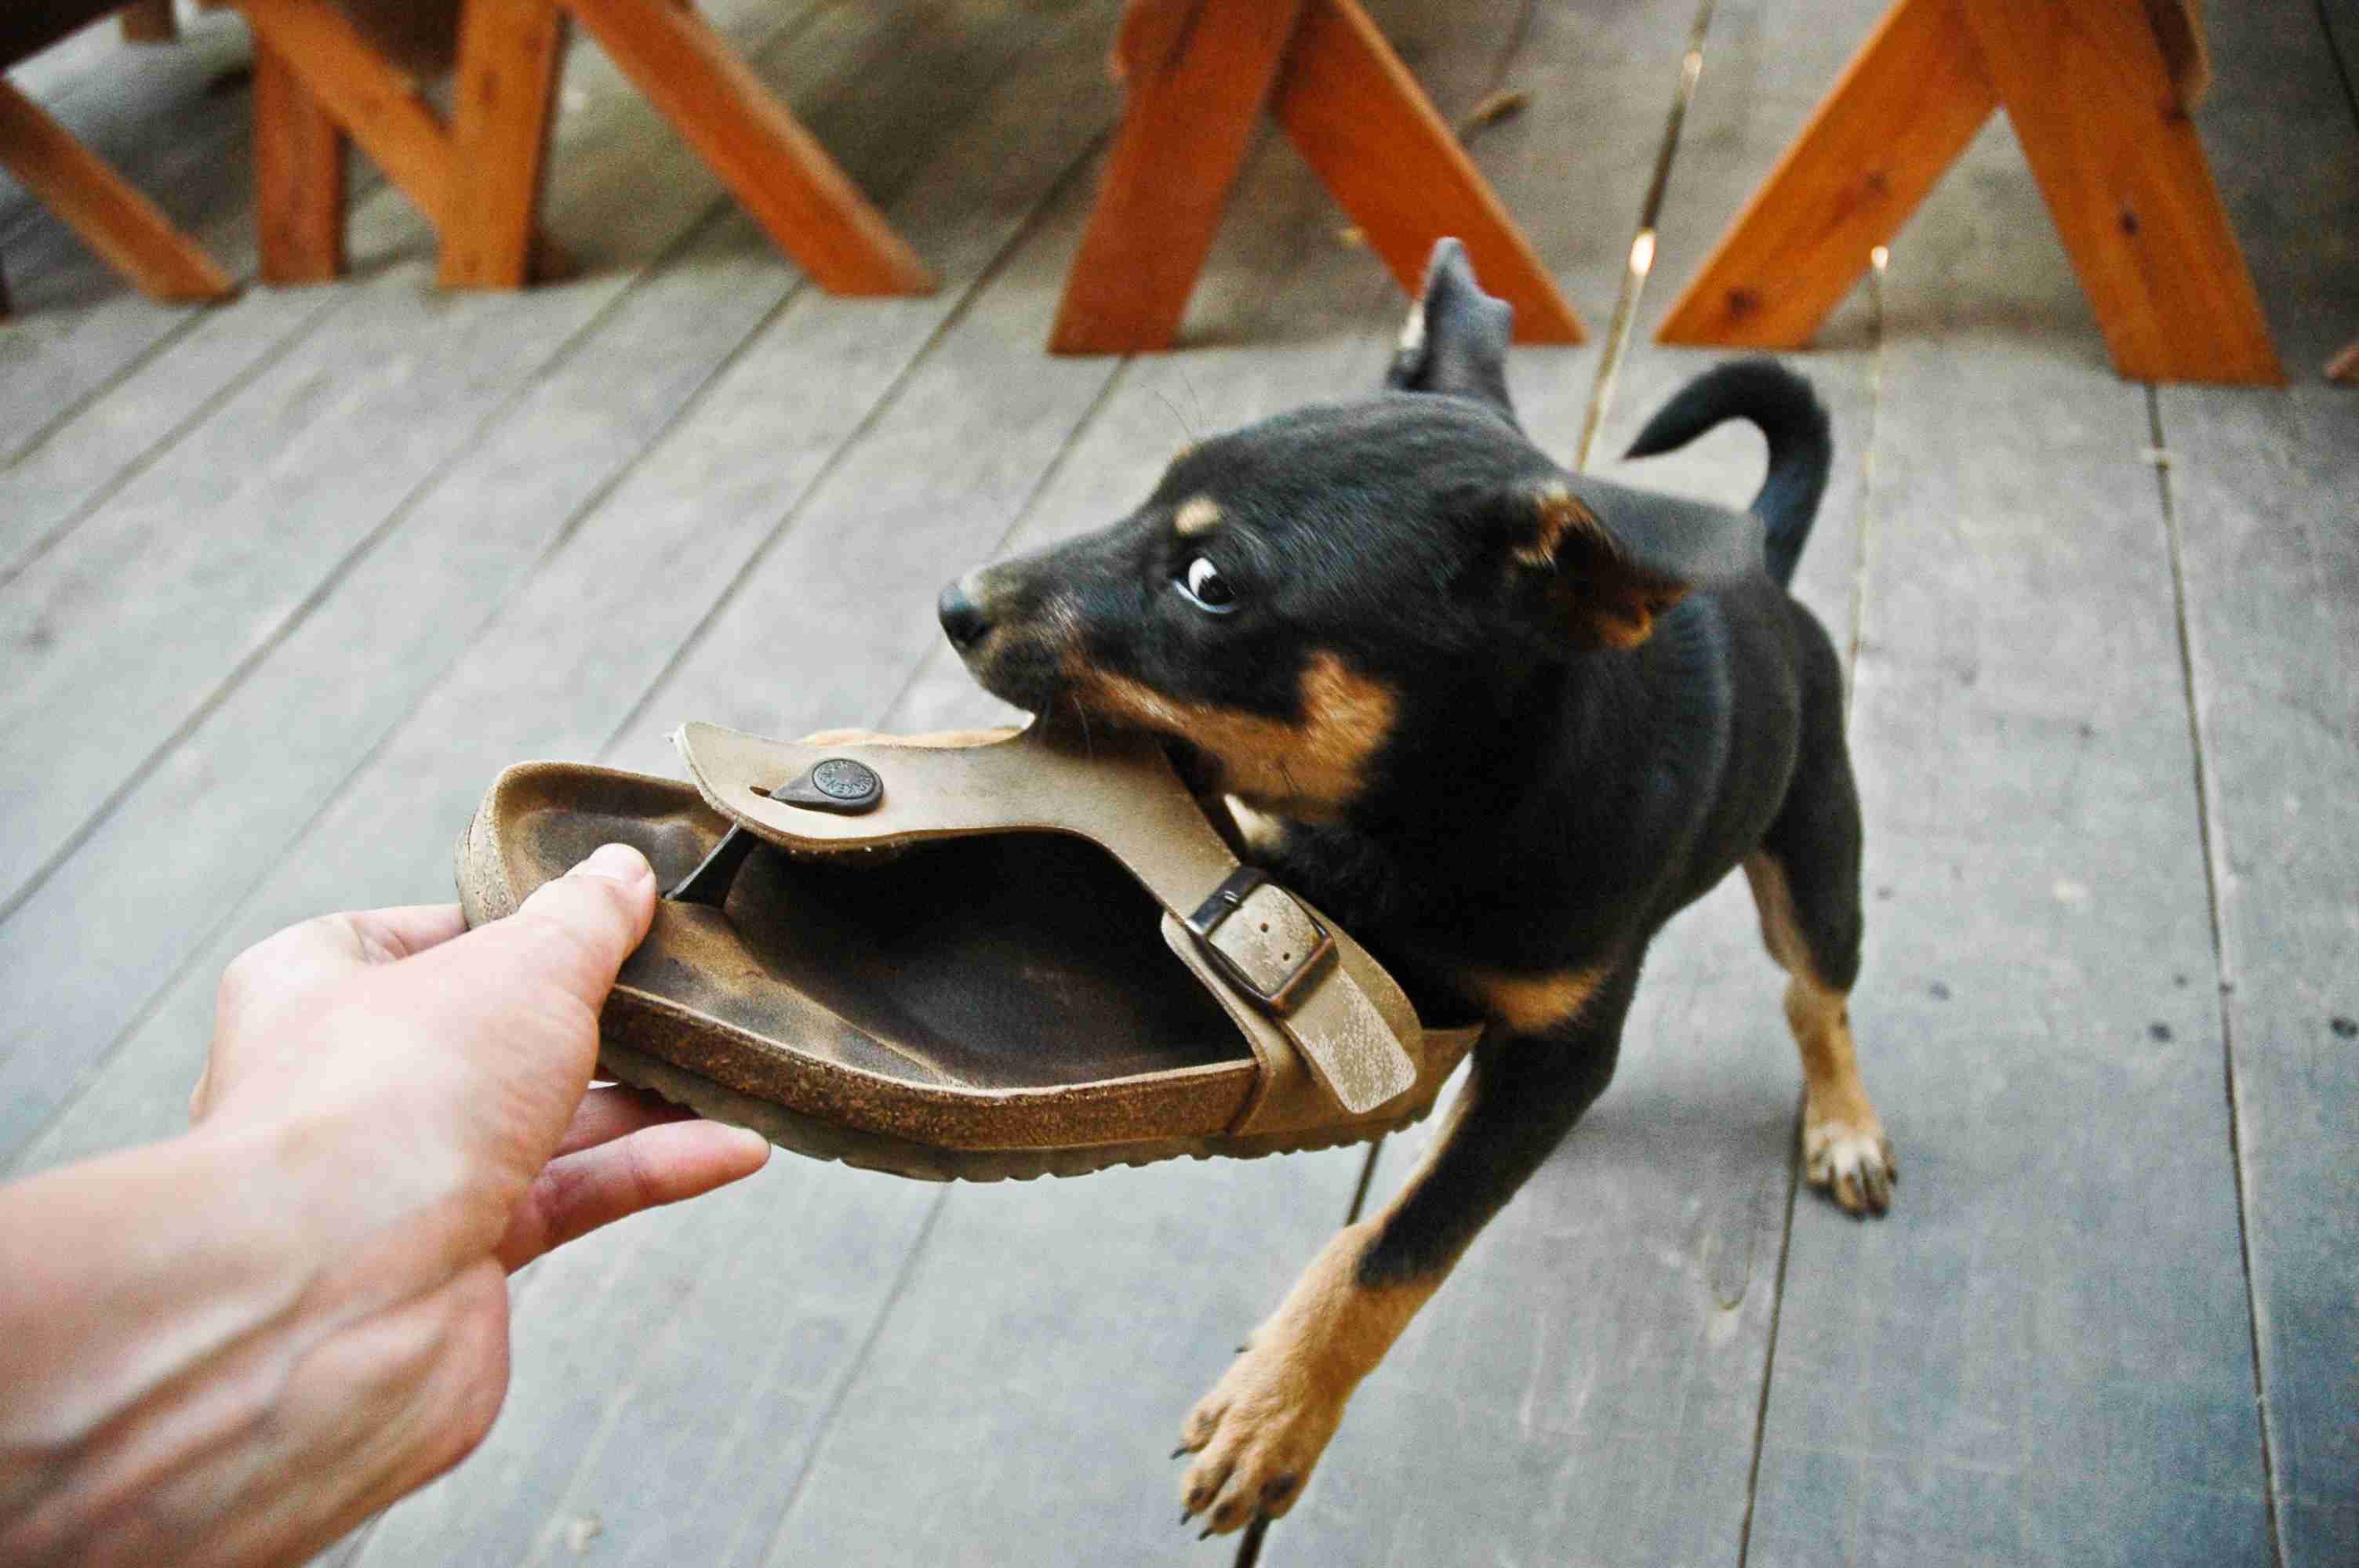 Snarling puppy tugs in play with owner's sandal.